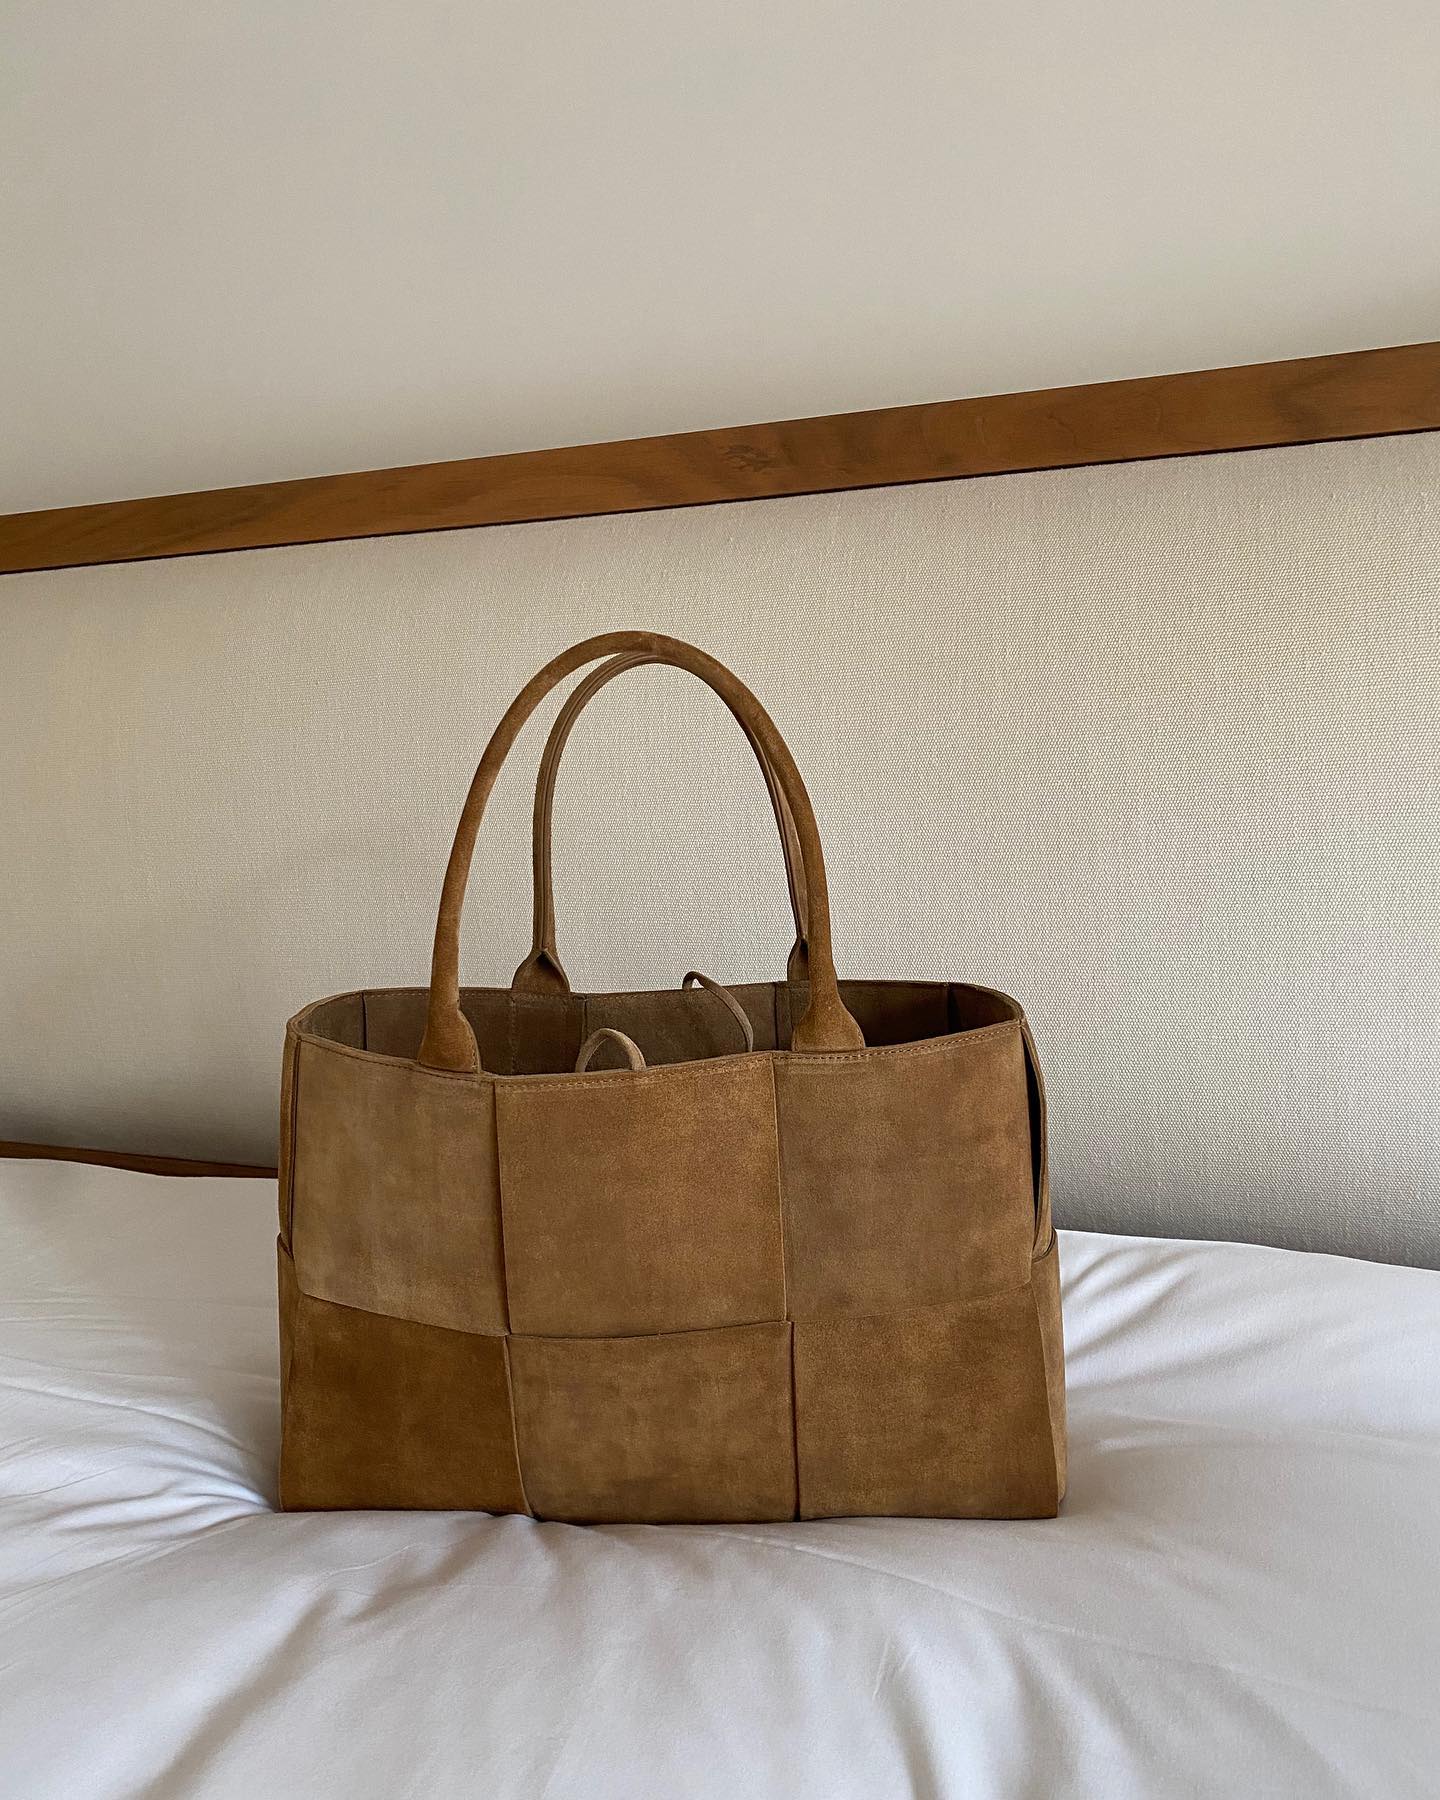 These Are the 11 Best Quiet-Luxury Bags